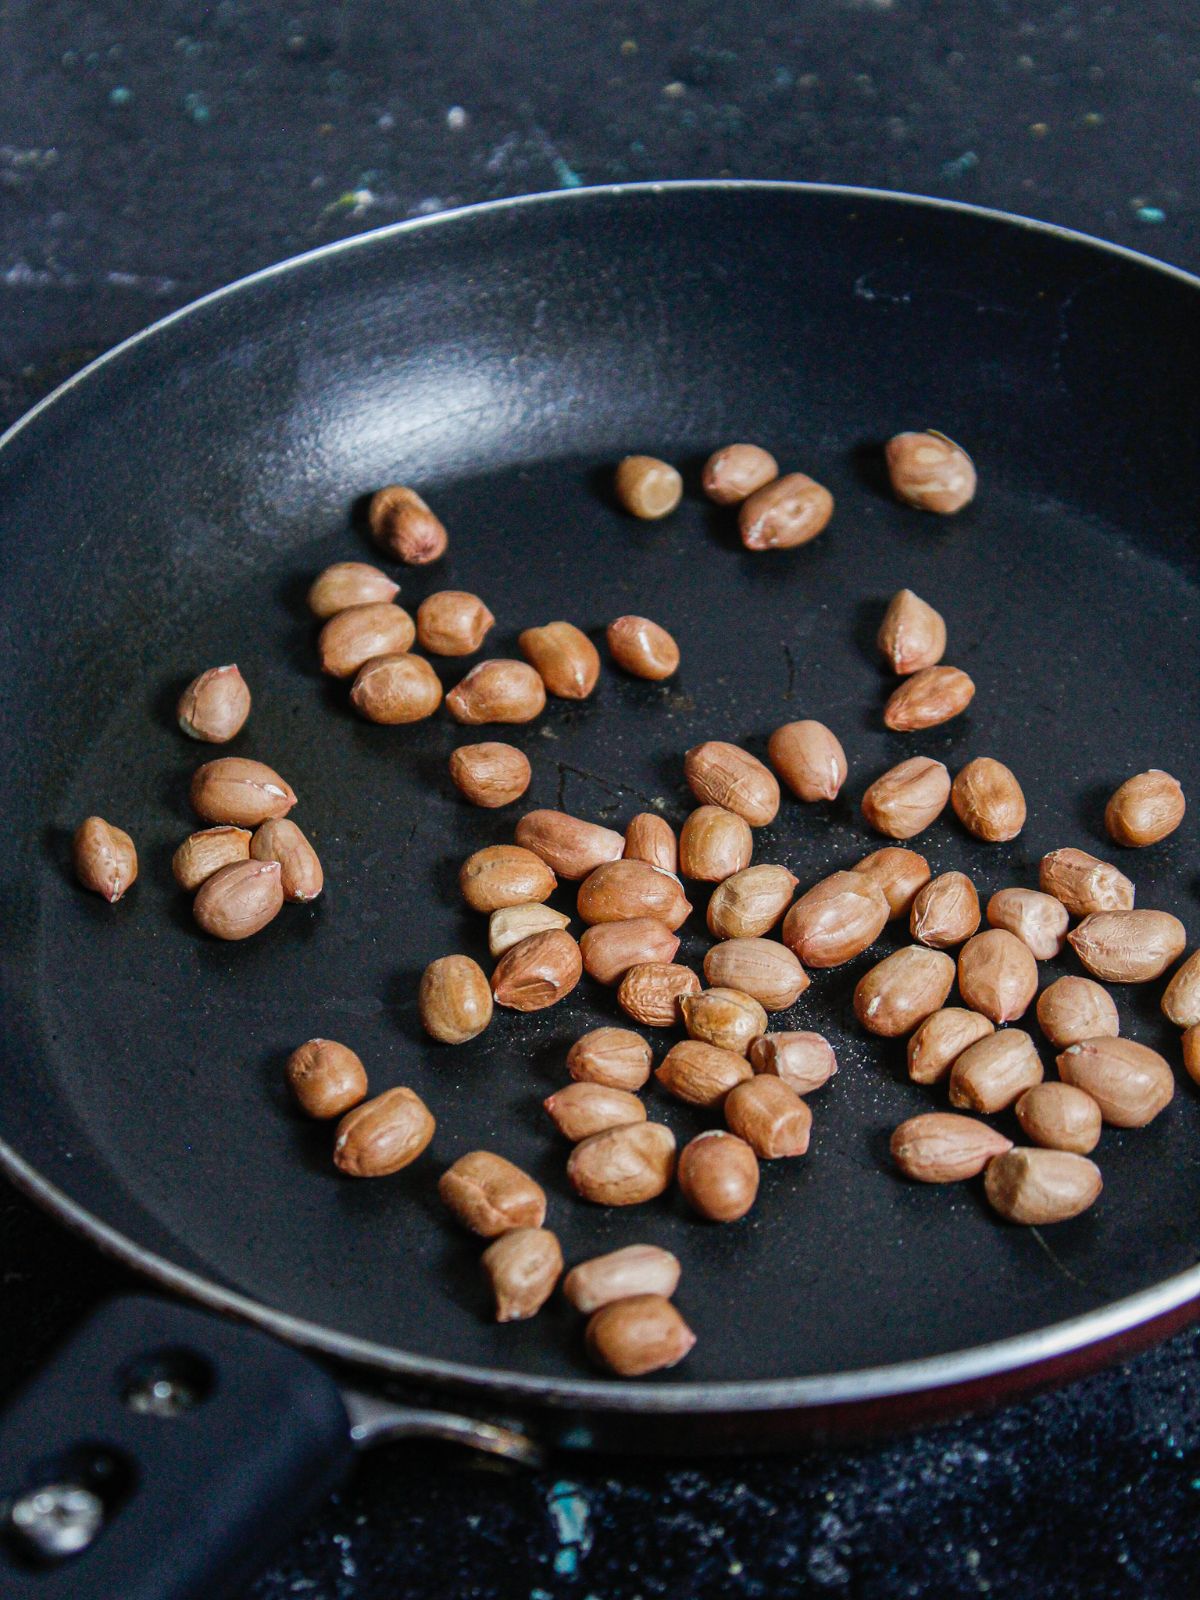 Roast some peanuts in a pan